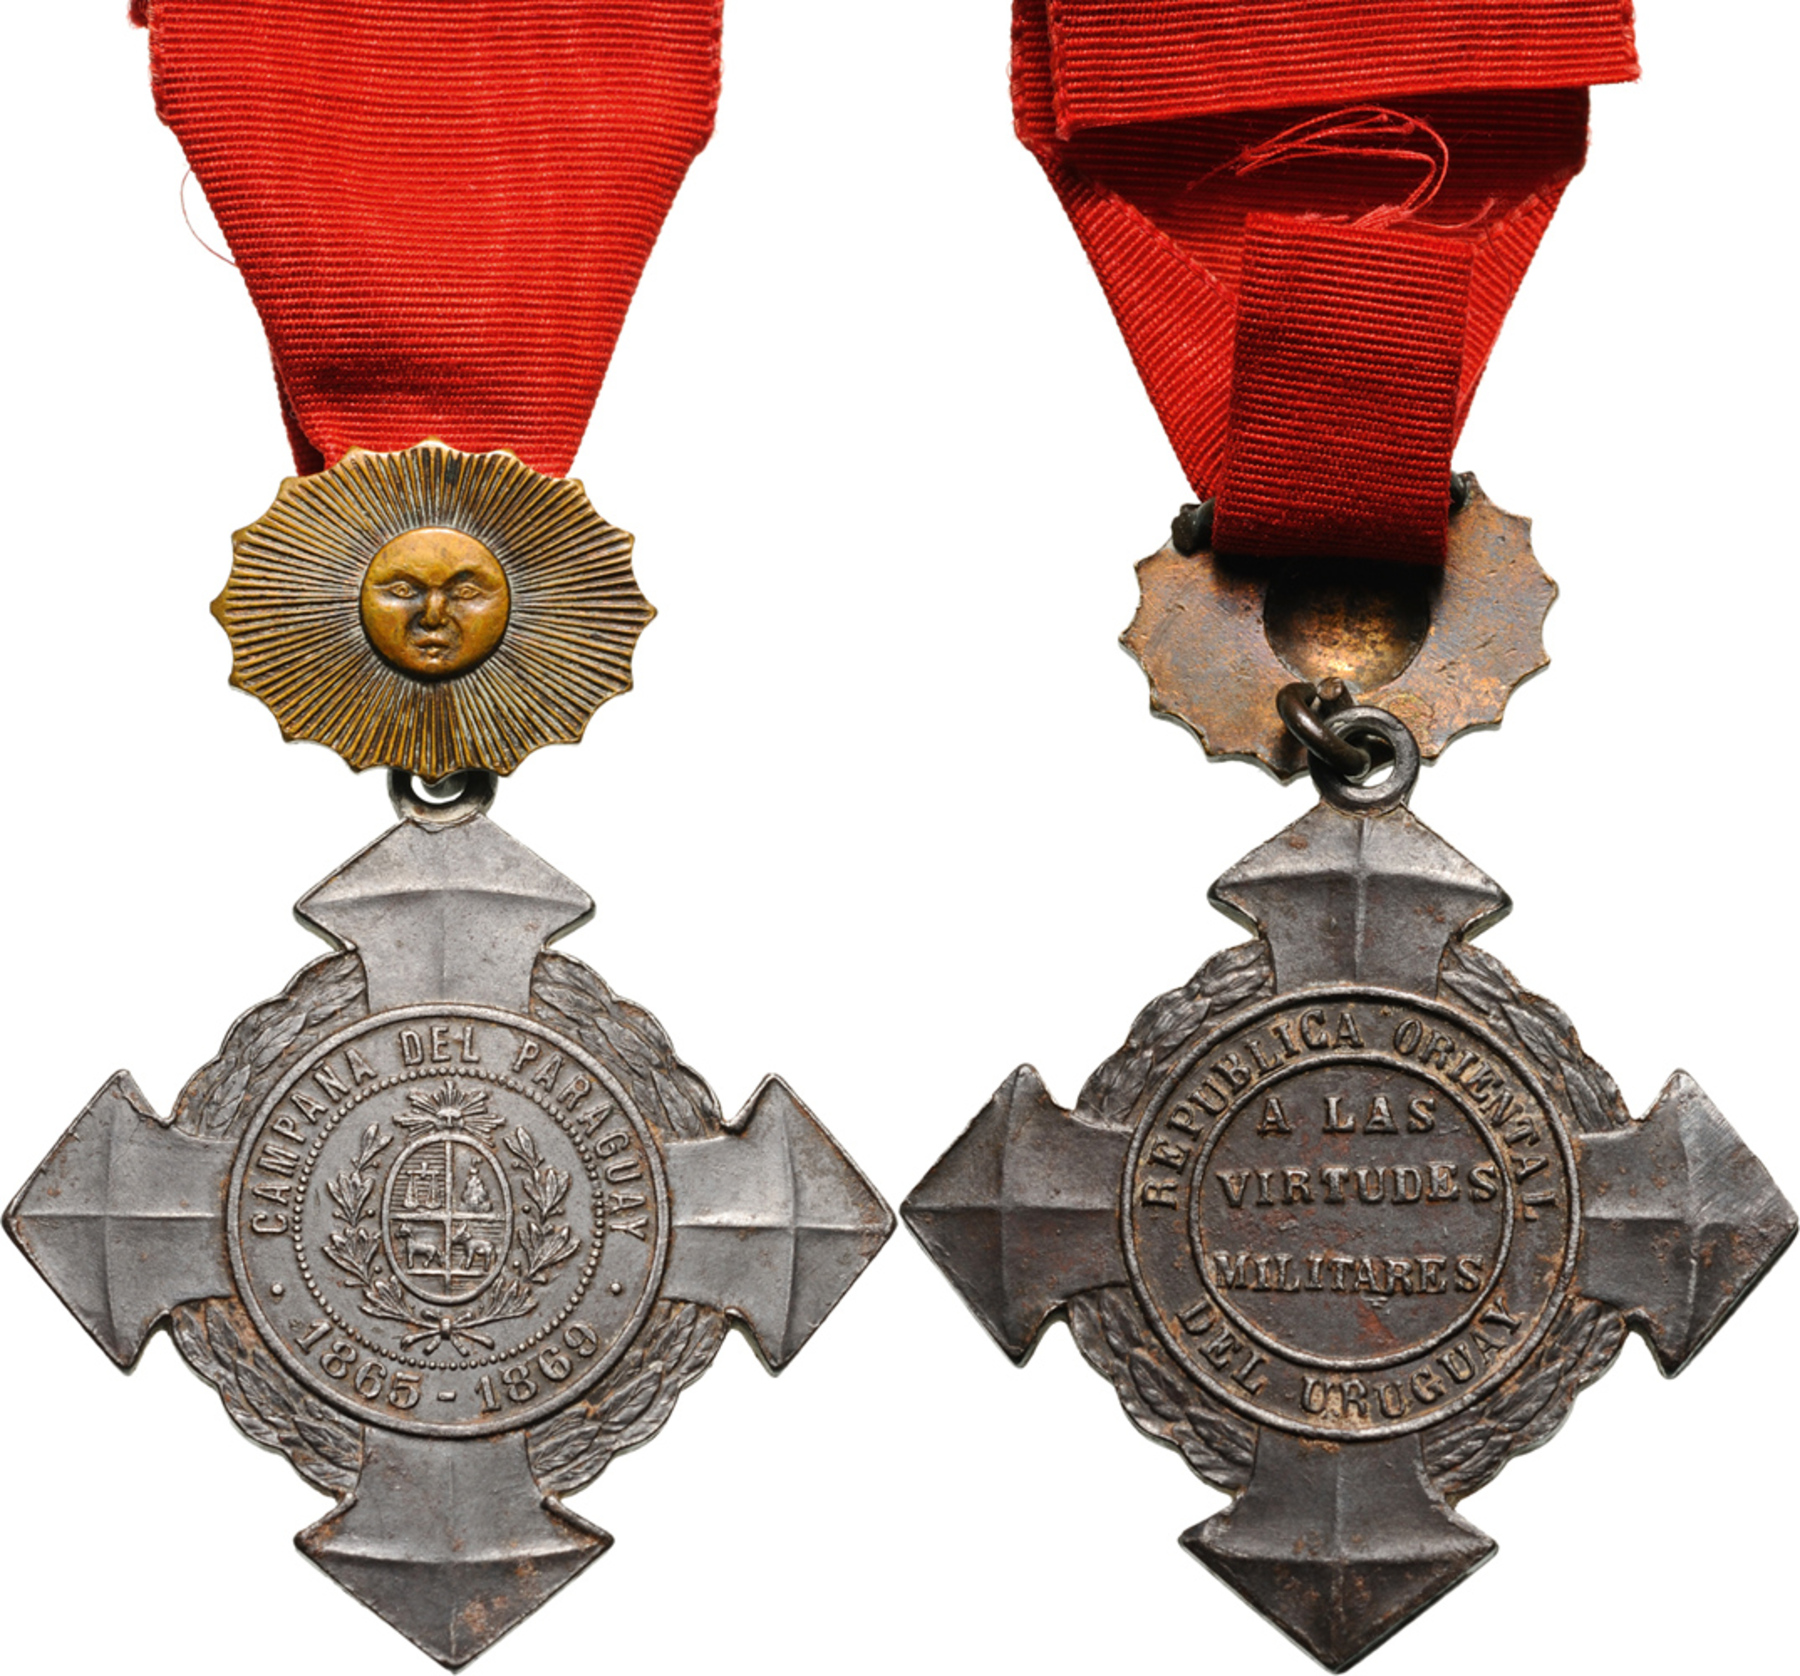 Paraguay Campaign Medal for the Allies in the War of Paraguay (1864-1870) for Officers